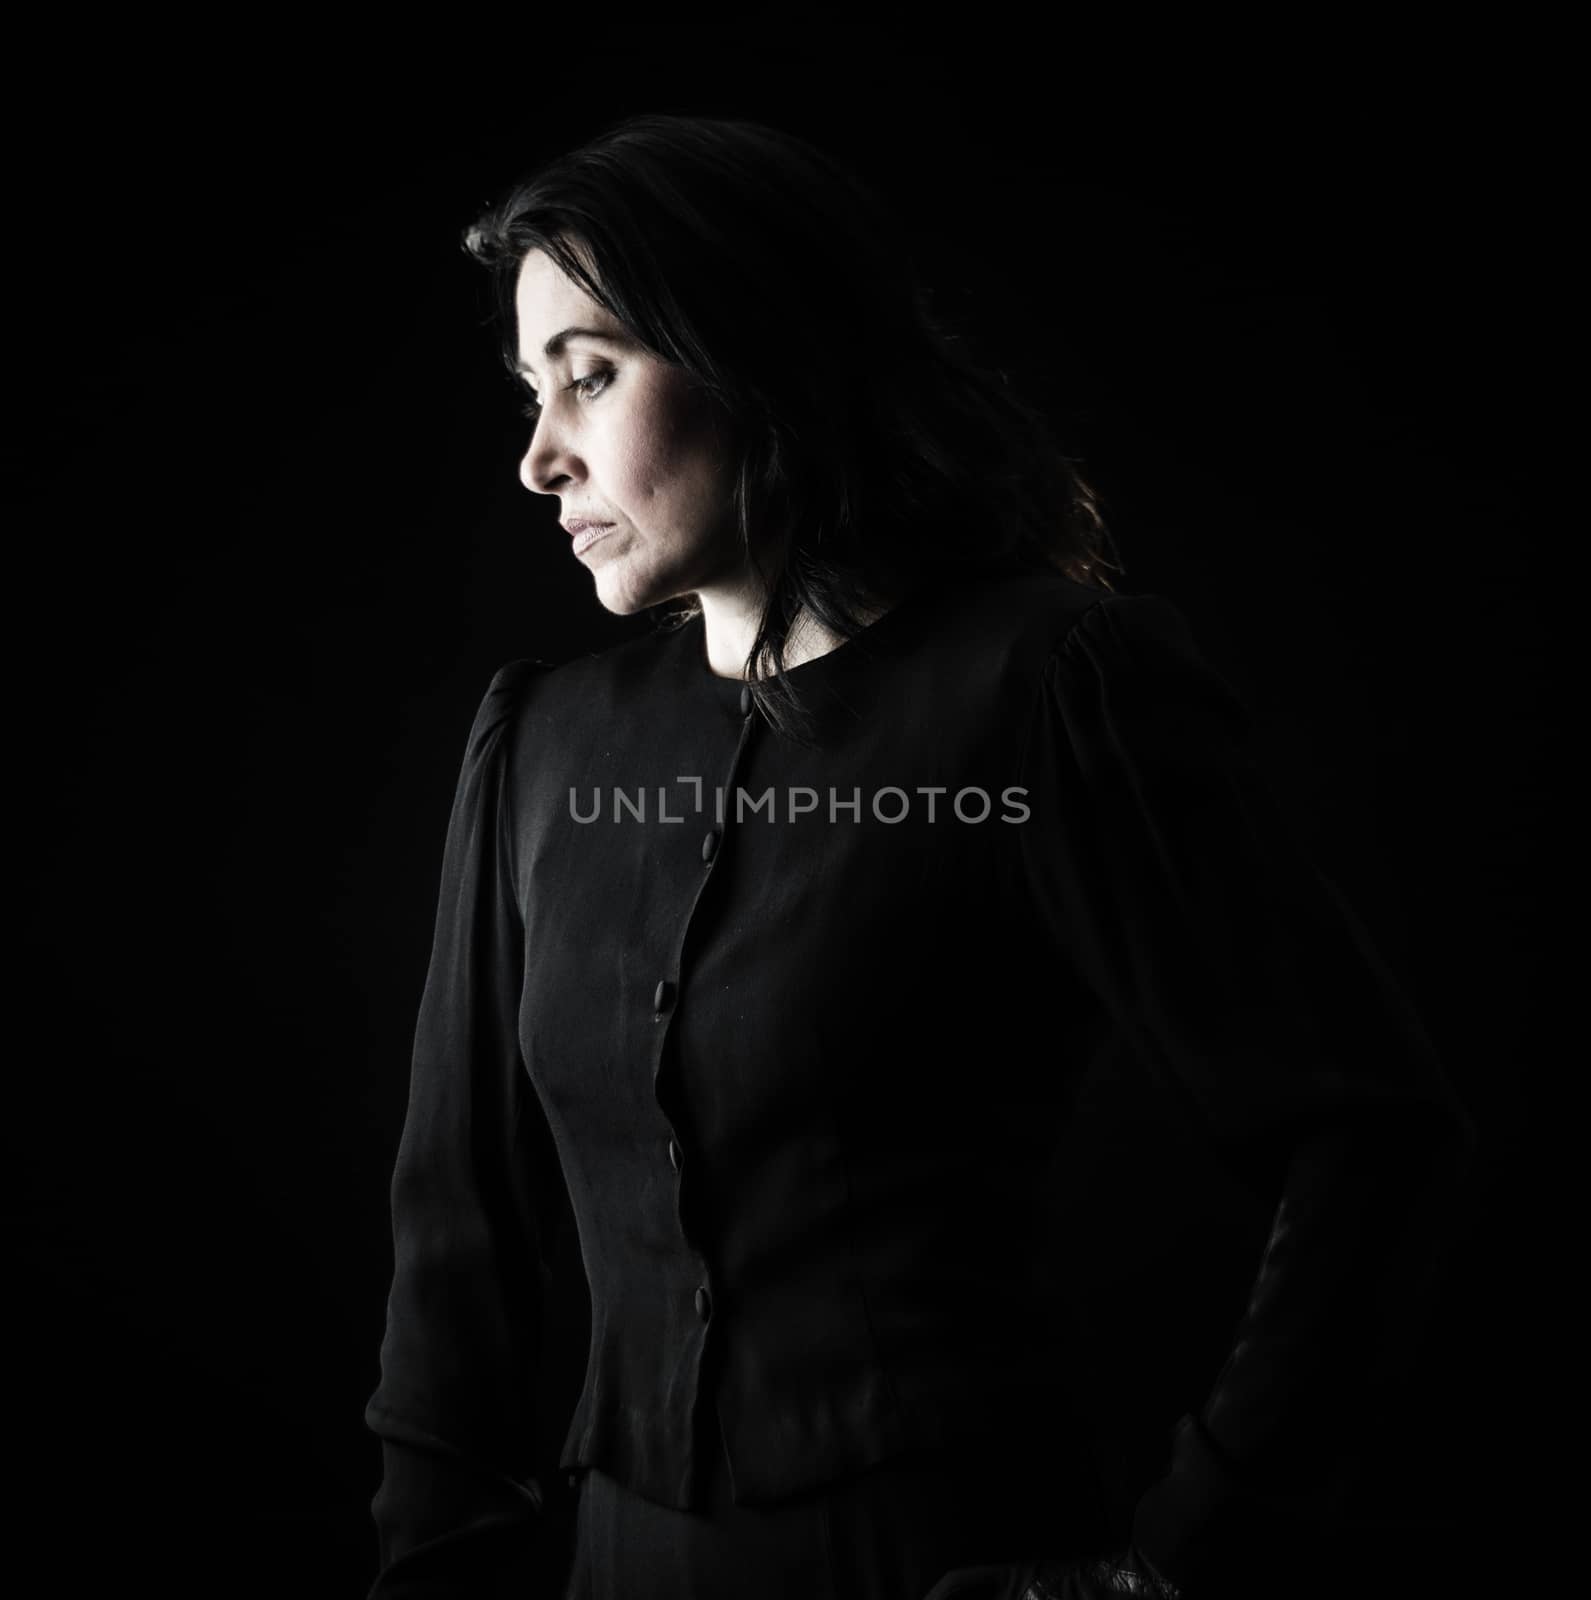 Brunette woman in black standing in front of black backdrop, with a hand on her hip and looking down with a serious, sad expression on her face